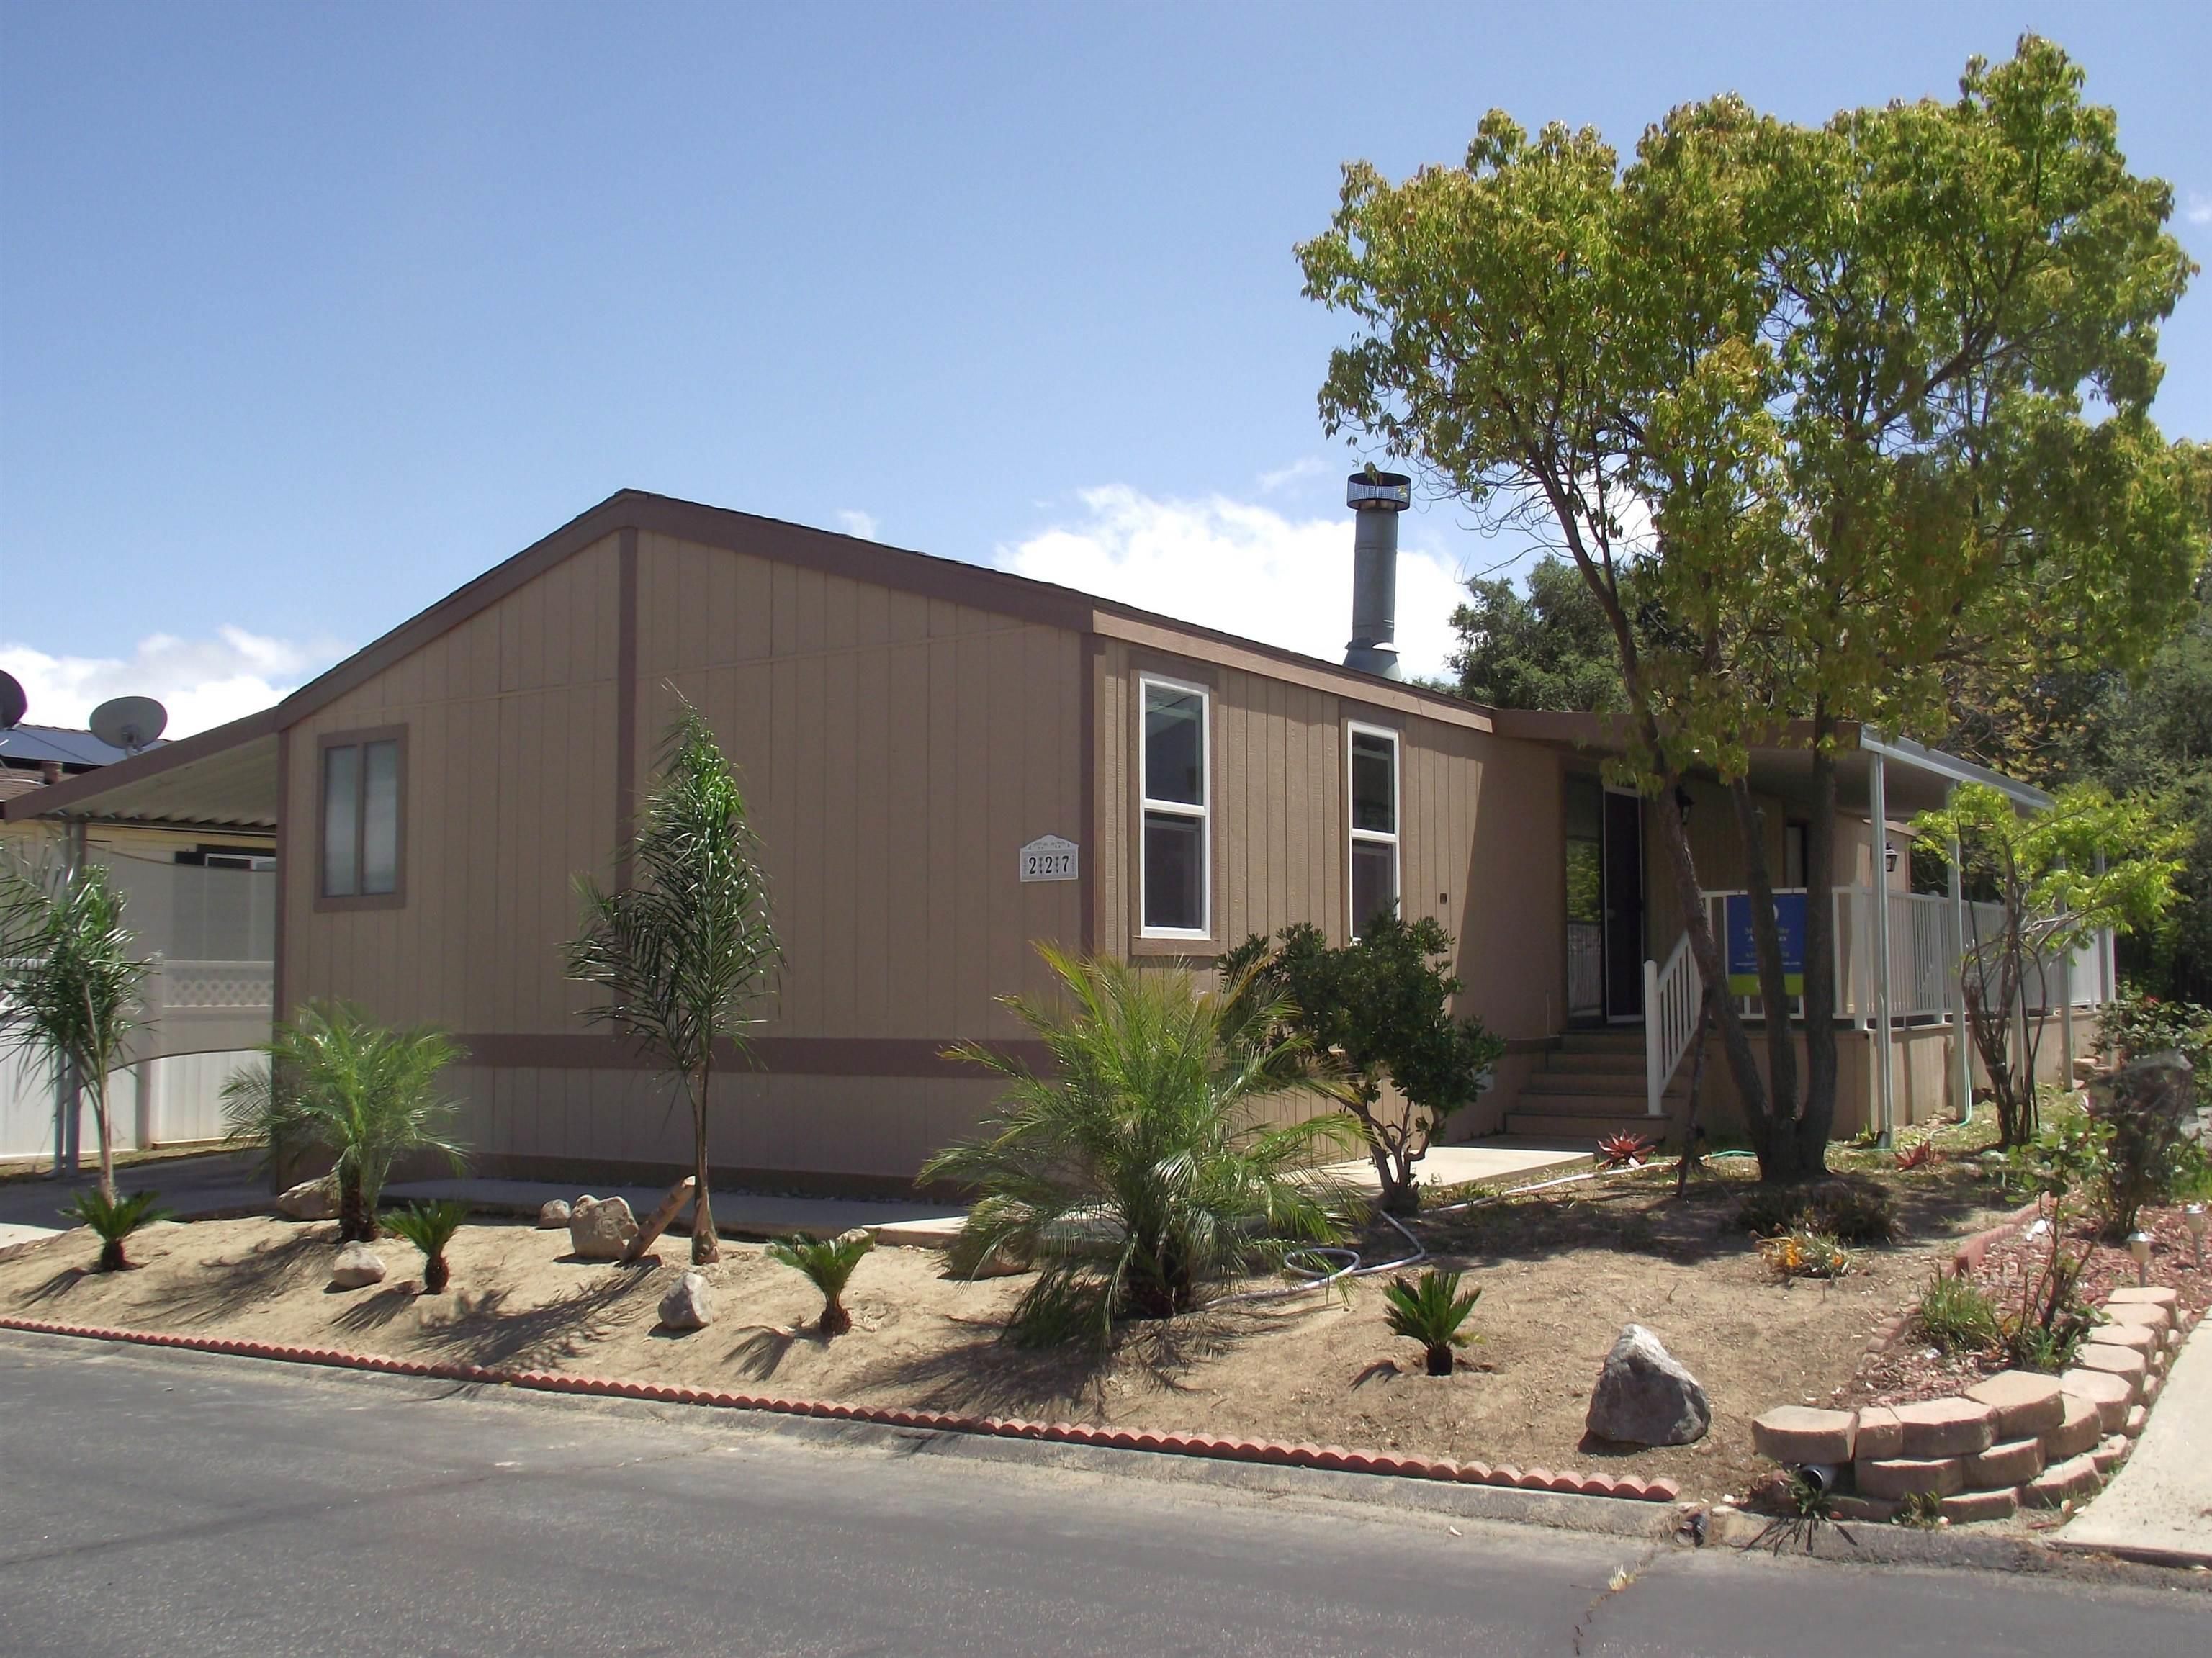 Main Photo: WARNER SPRINGS Manufactured Home for sale : 2 bedrooms : 35109 Highway 79 #SPC #227 /UNIT #226